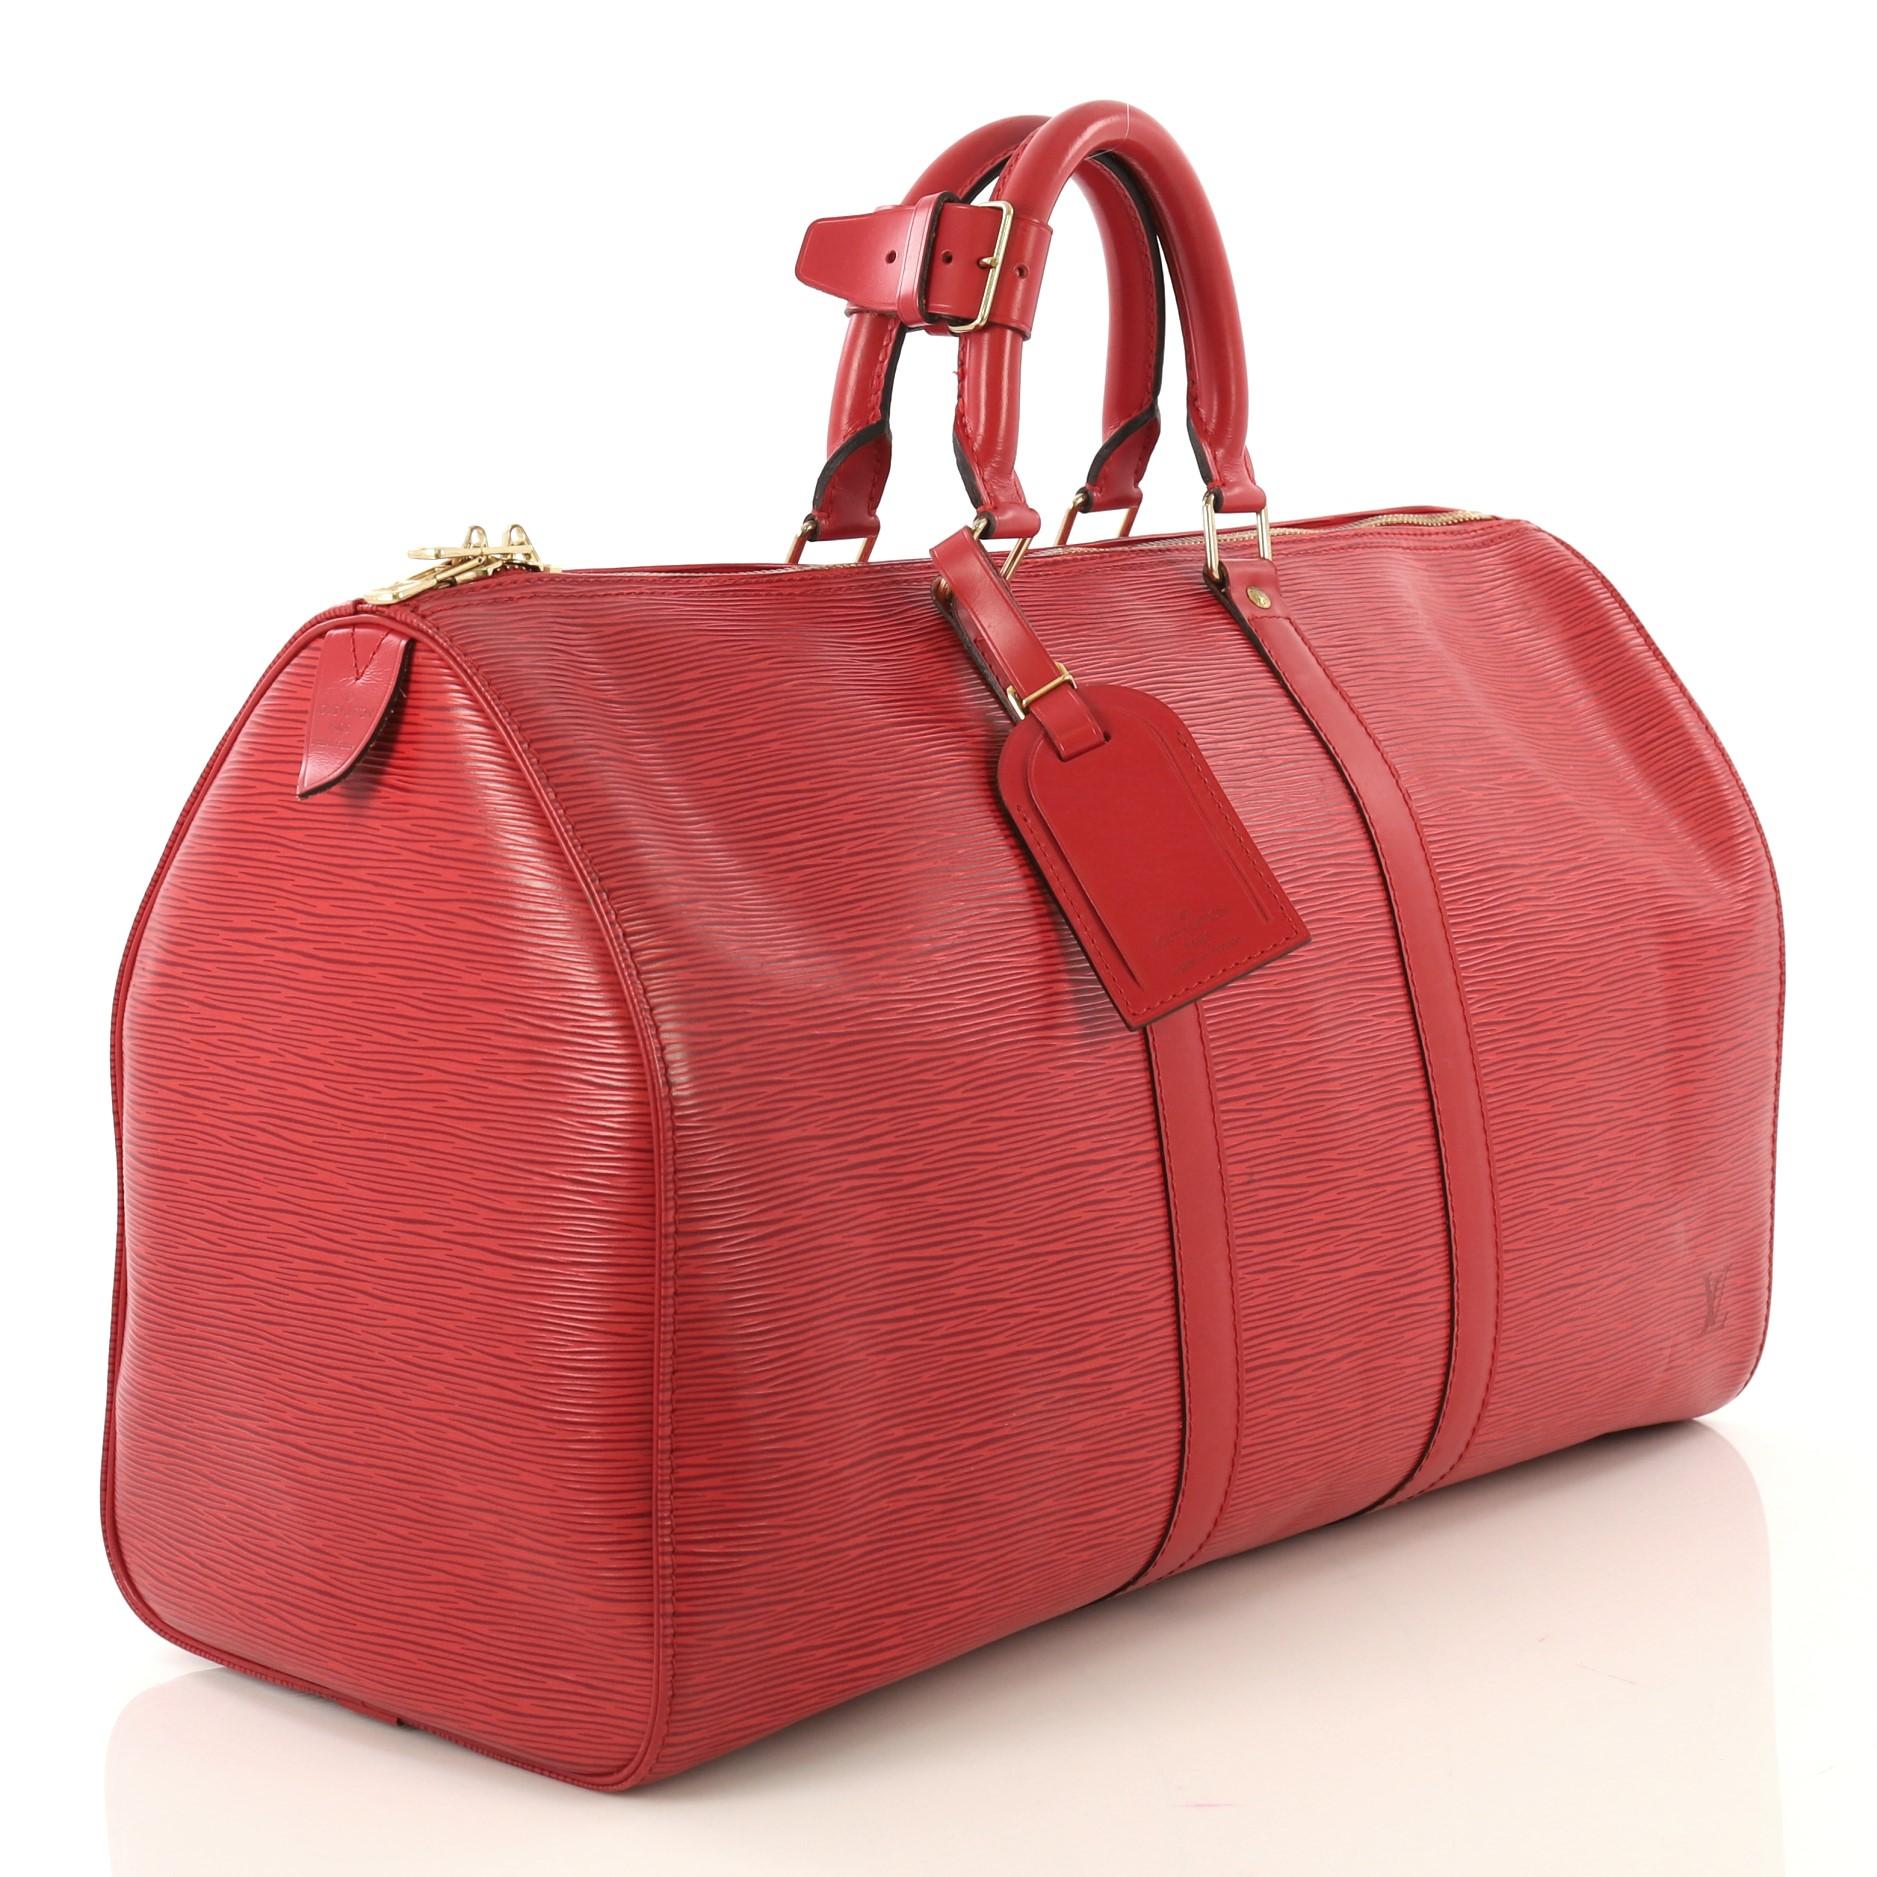 This Louis Vuitton Keepall Bag Epi Leather 45, crafted from red epi leather, features dual rolled handles, subtle LV logo, and gold-tone hardware. Its zip closure opens to a red raw leather interior. Authenticity code reads: V10923. 

Estimated